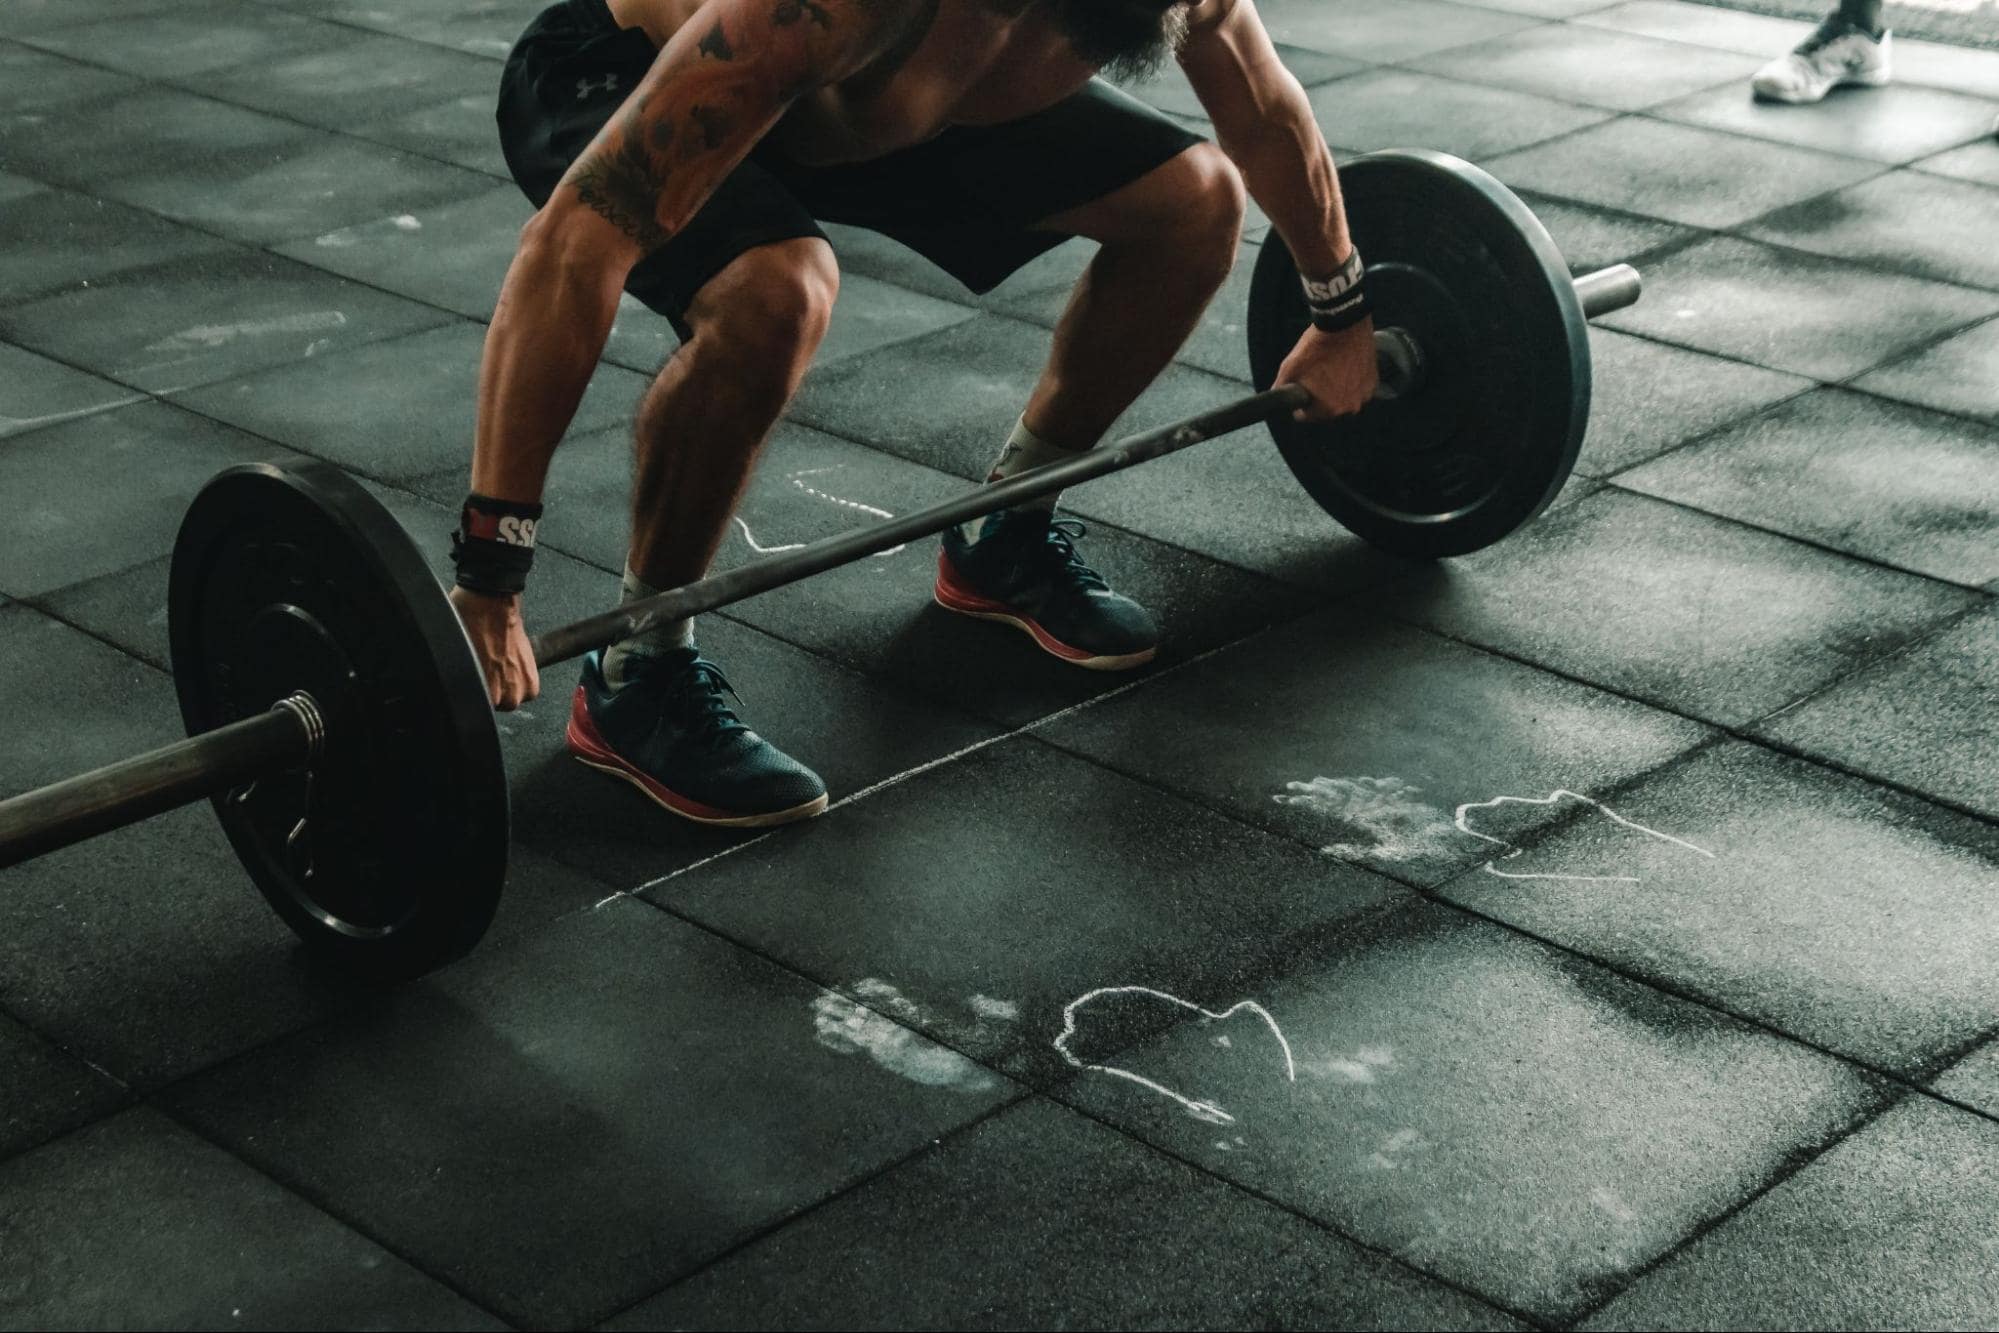 crouched person about to snatch barbell